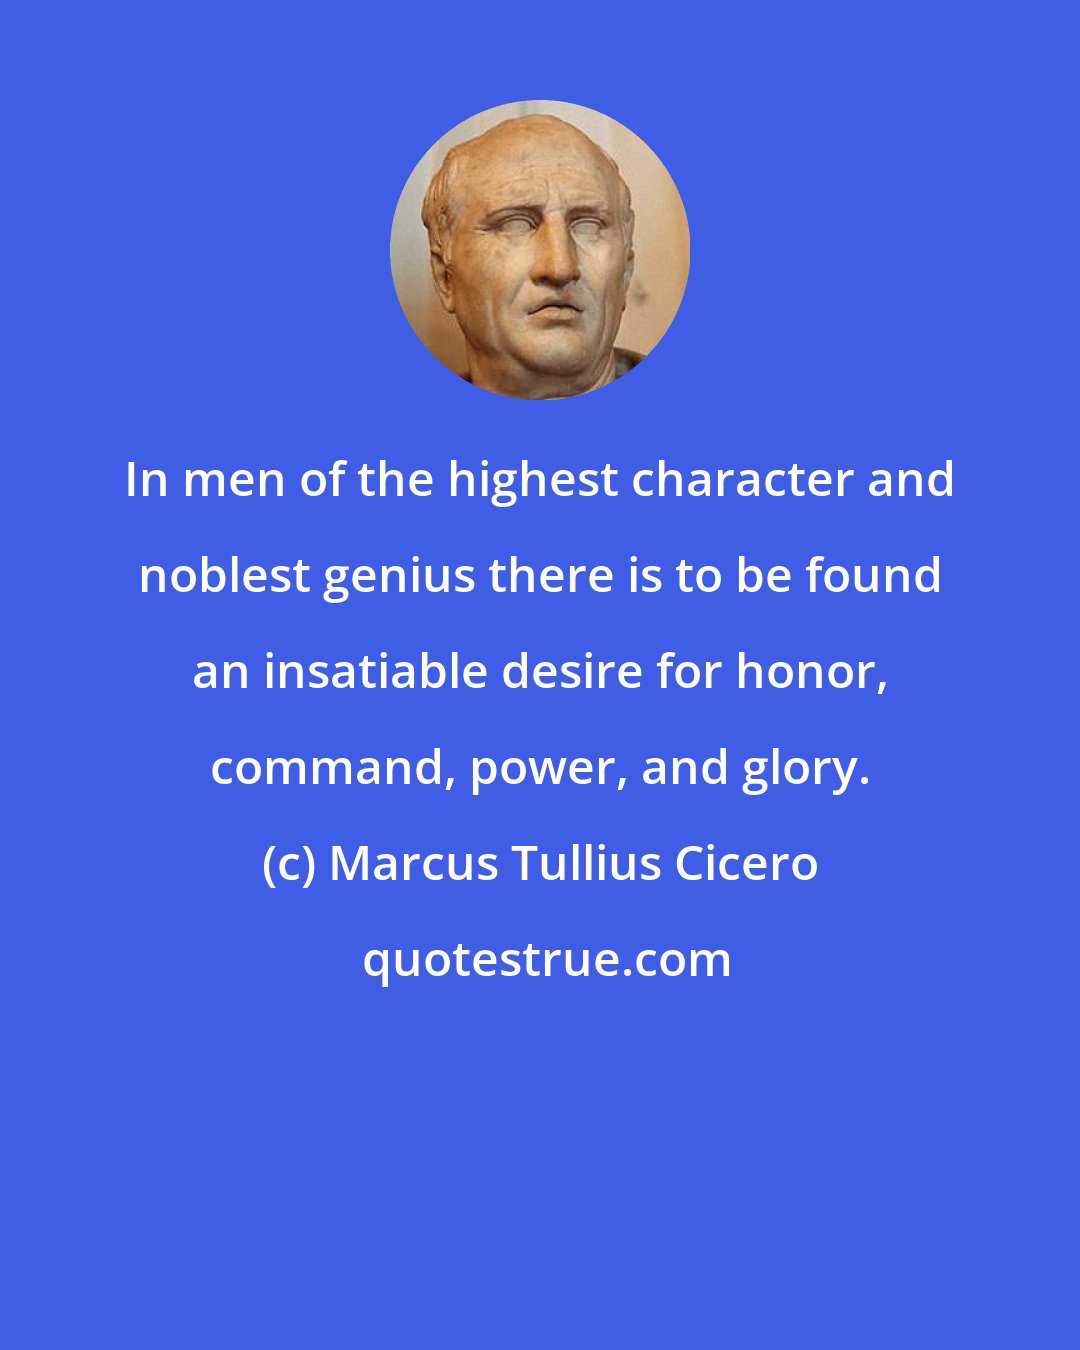 Marcus Tullius Cicero: In men of the highest character and noblest genius there is to be found an insatiable desire for honor, command, power, and glory.